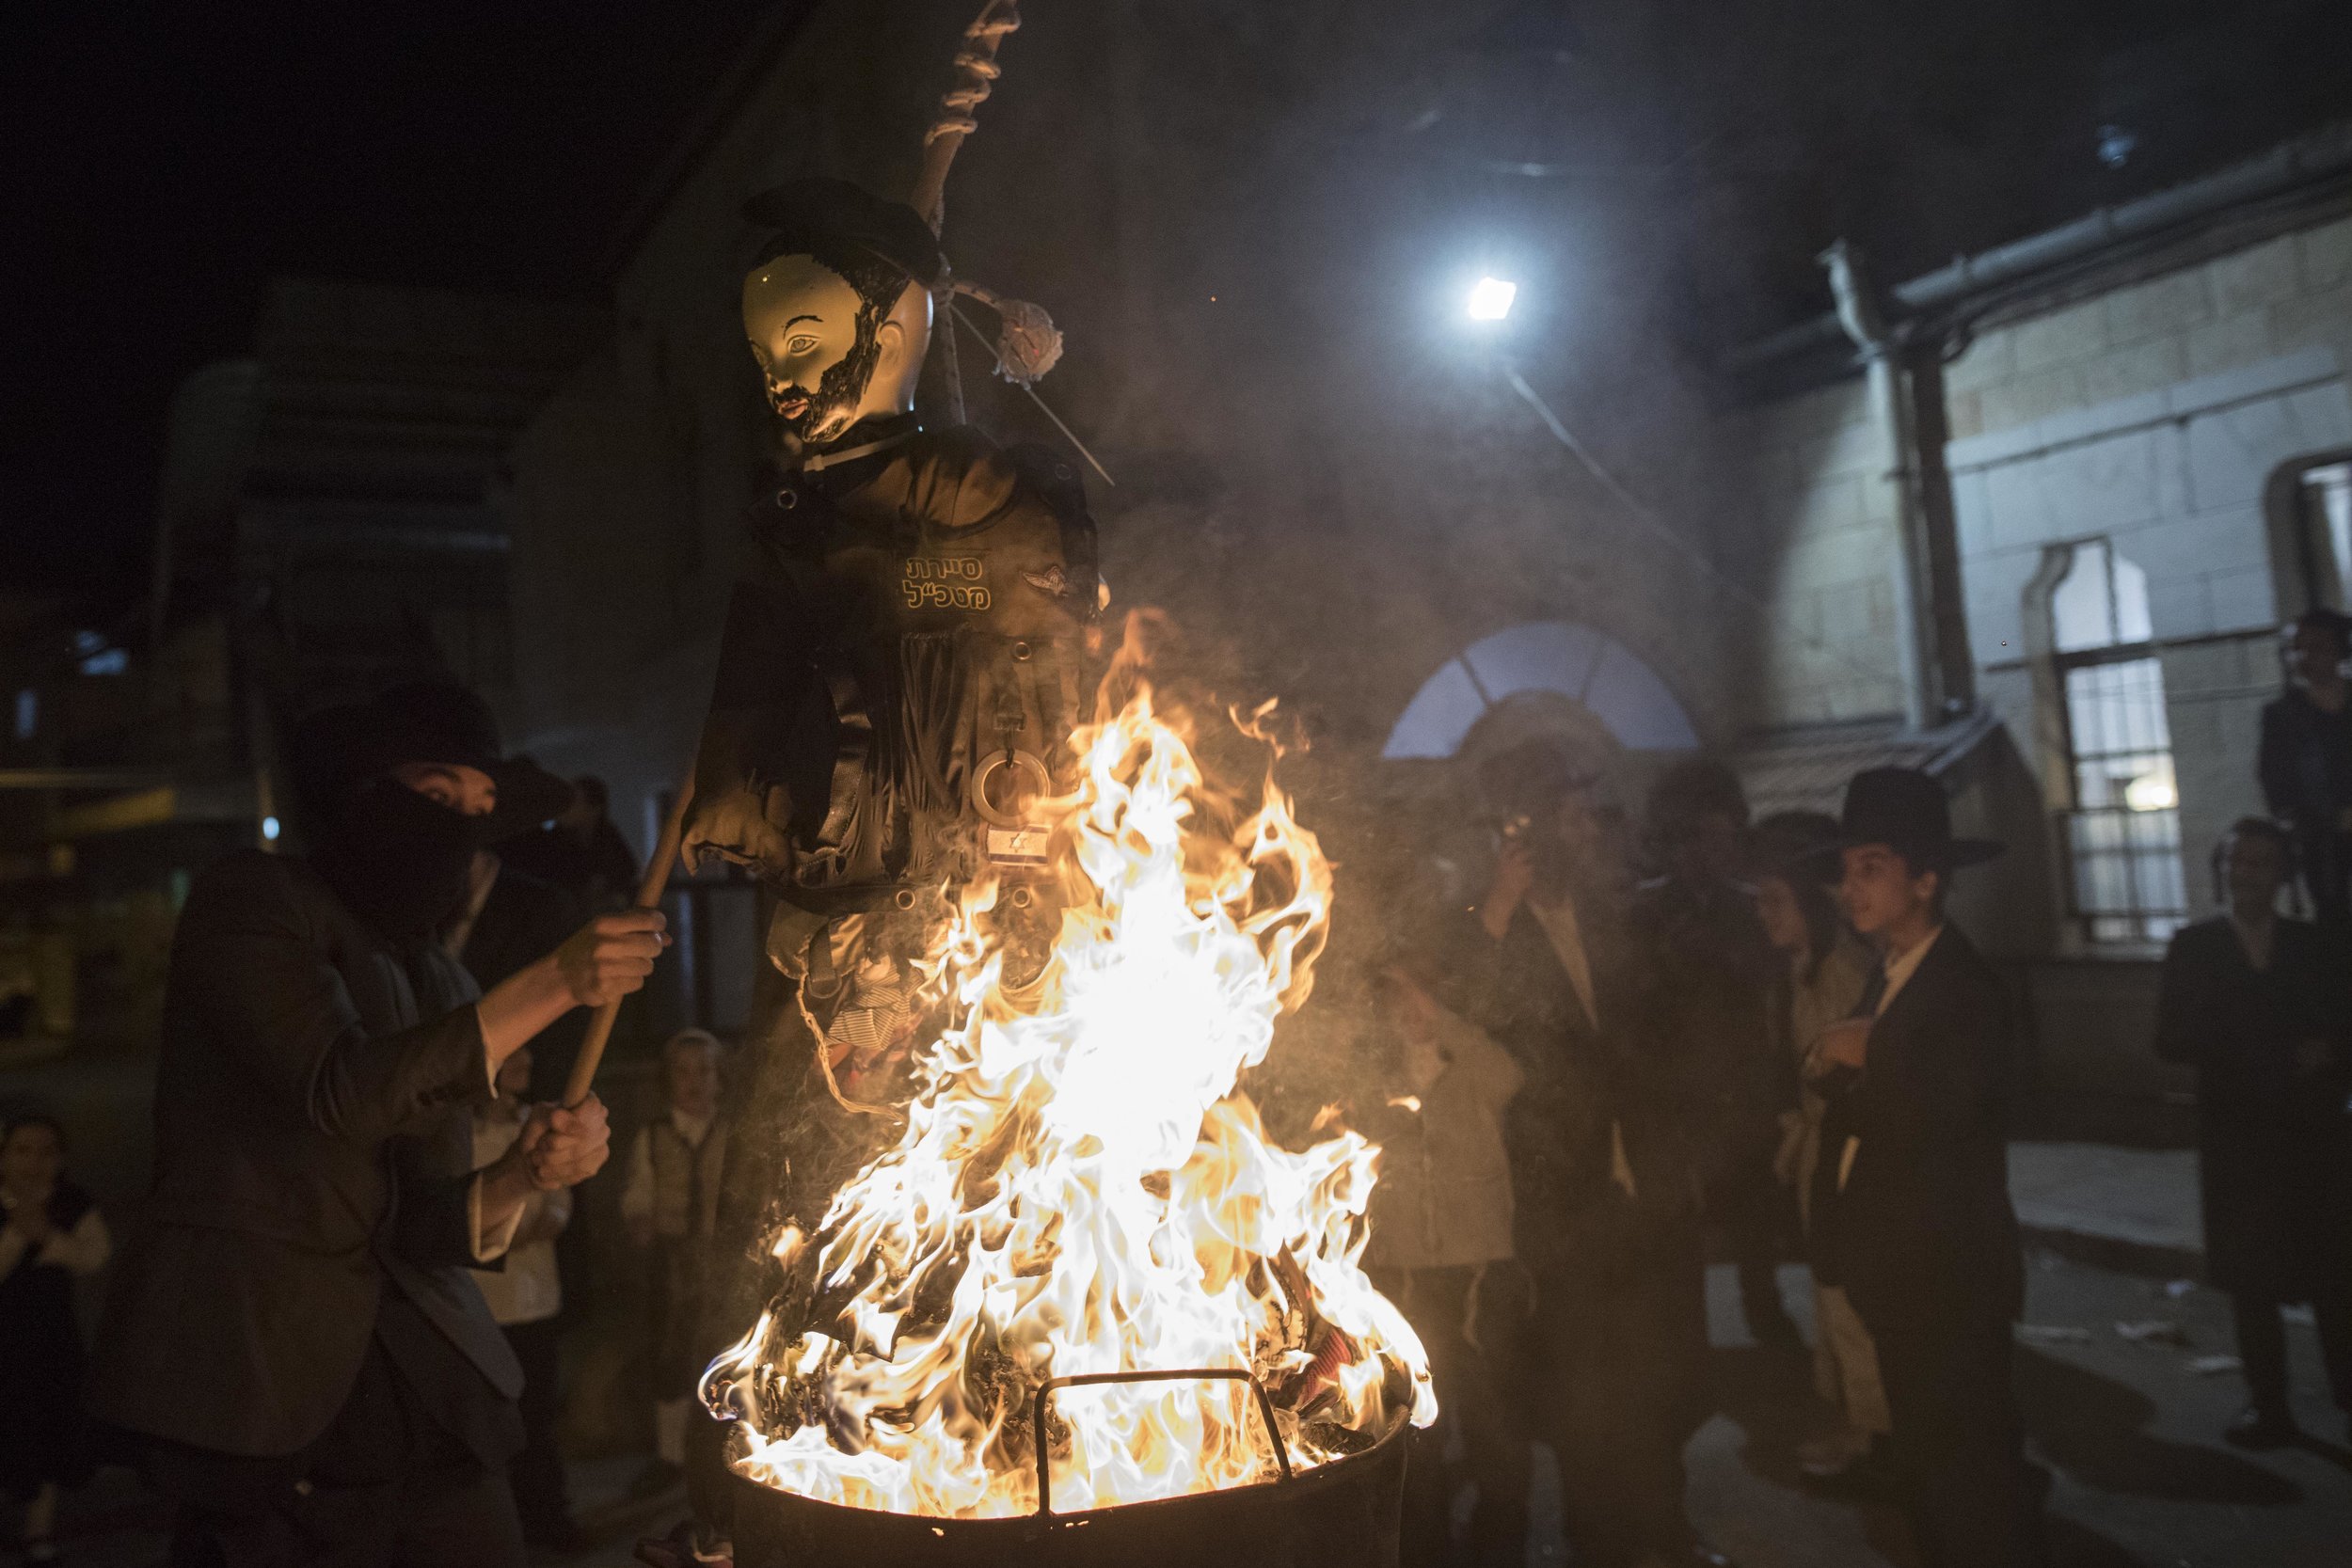  Ultra orthodox jews seen burning a doll of an israeli soldier during the celebration of the Jewish holiday of Lag Baomer in ultra-orthodox neighborhood of Mea Shearim in Jerusalem on May 14, 2017. 